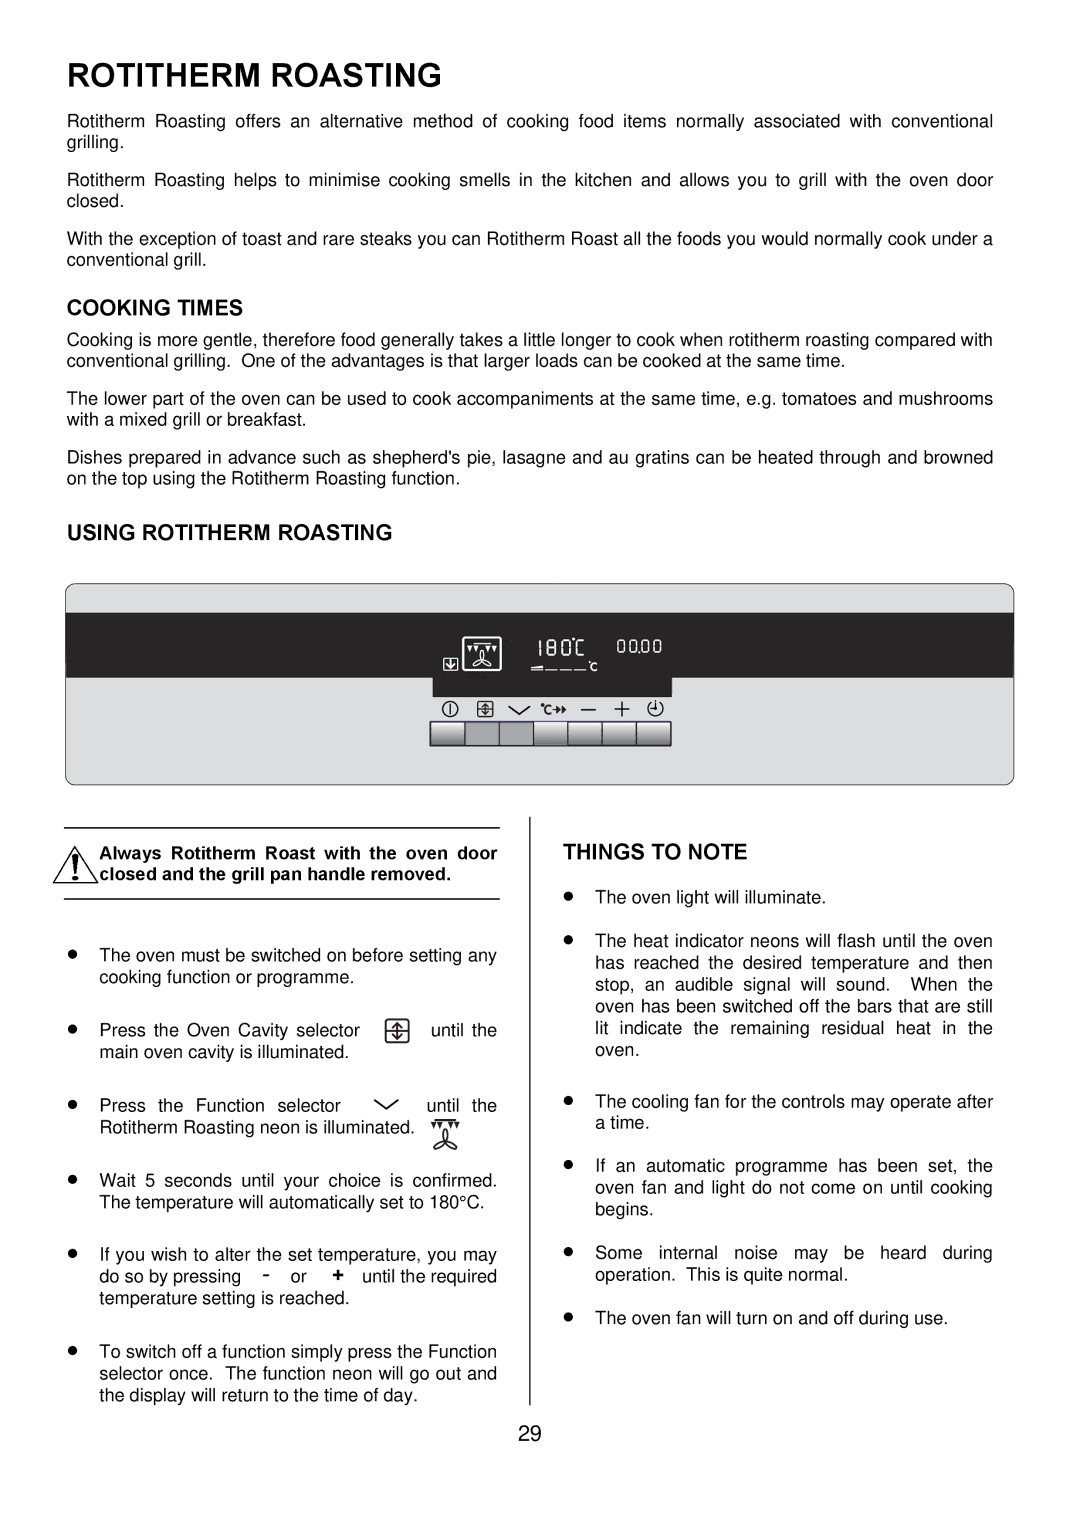 Electrolux D8800-4 operating instructions Cooking Times, Using Rotitherm Roasting 